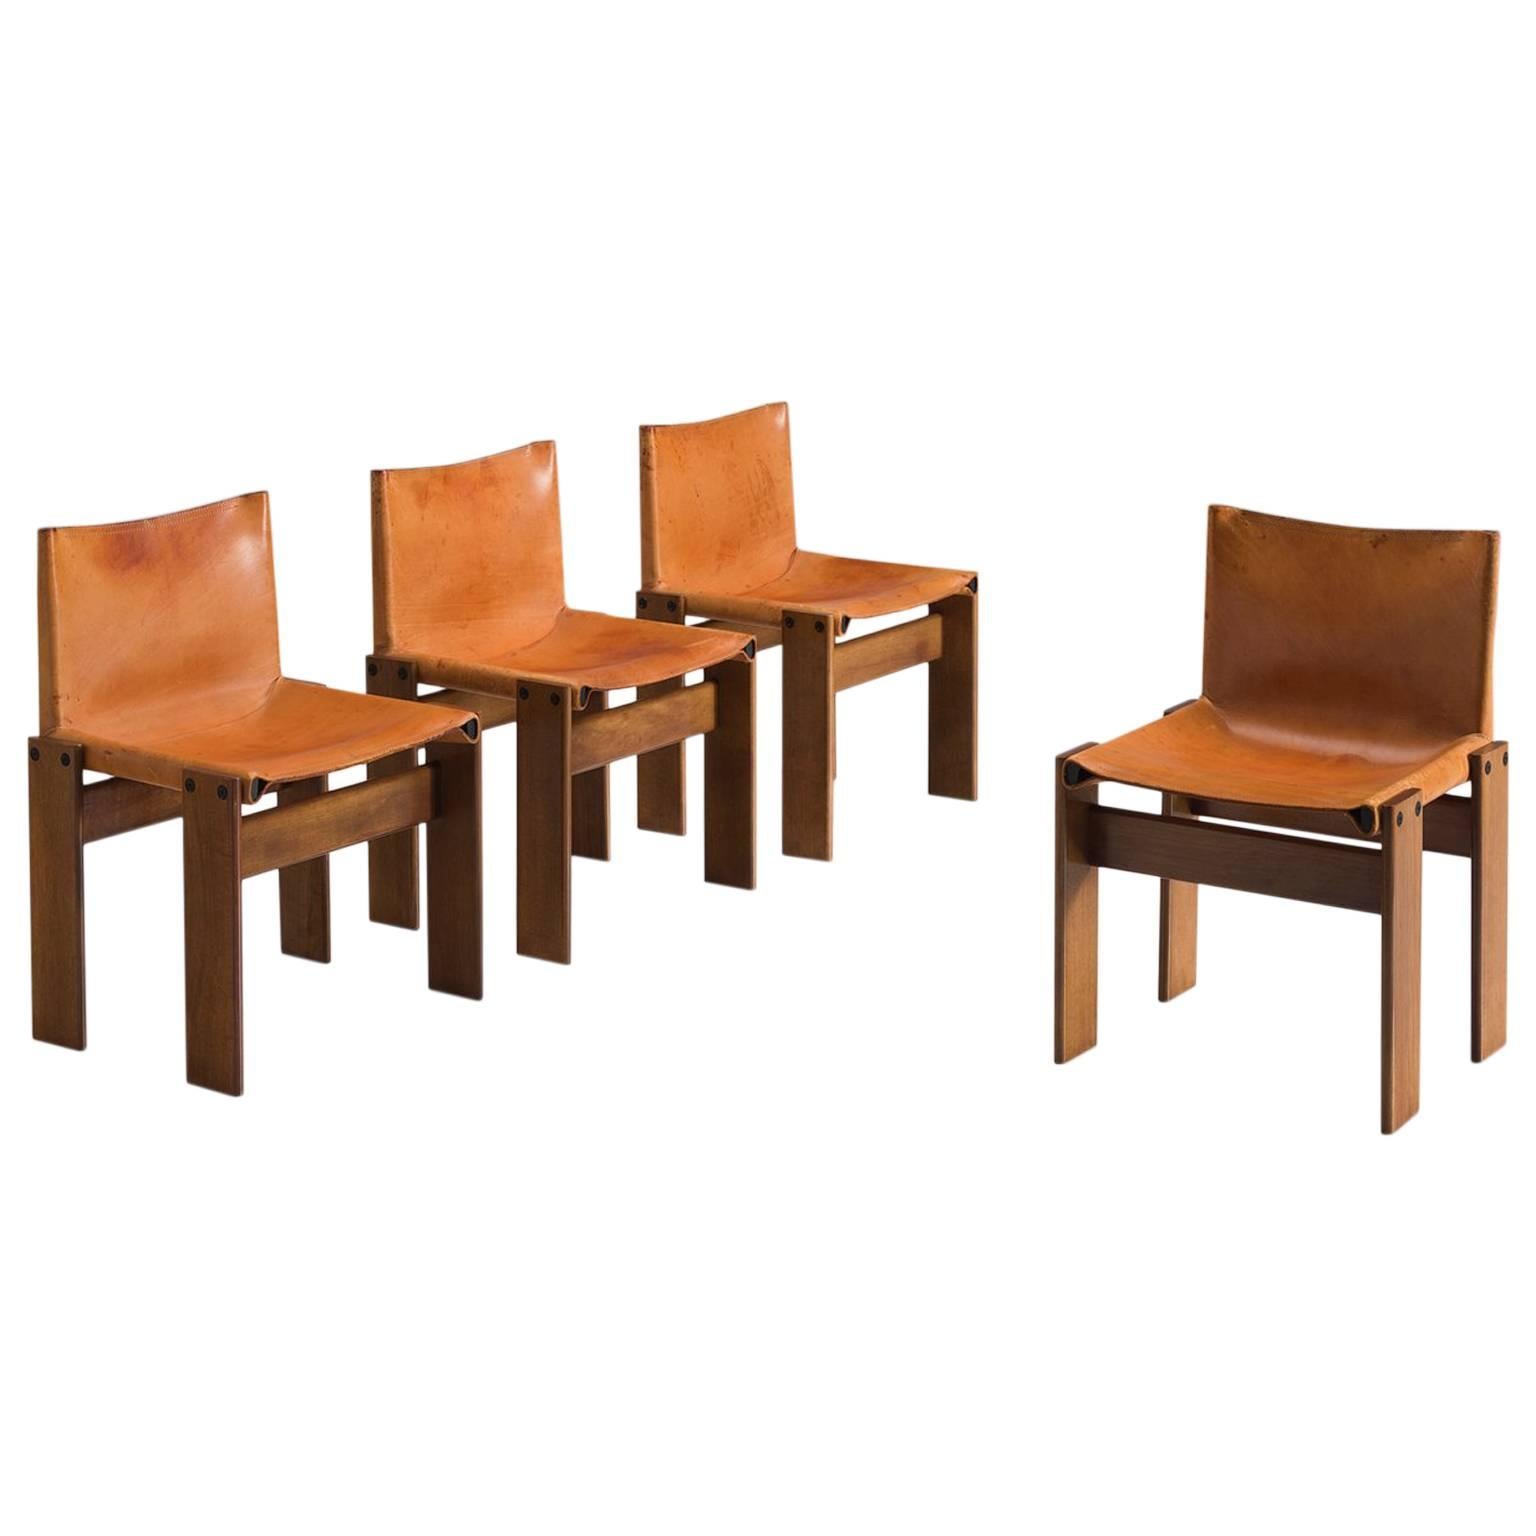 Scarpa Monk Chairs in Patinated Cognac Leather